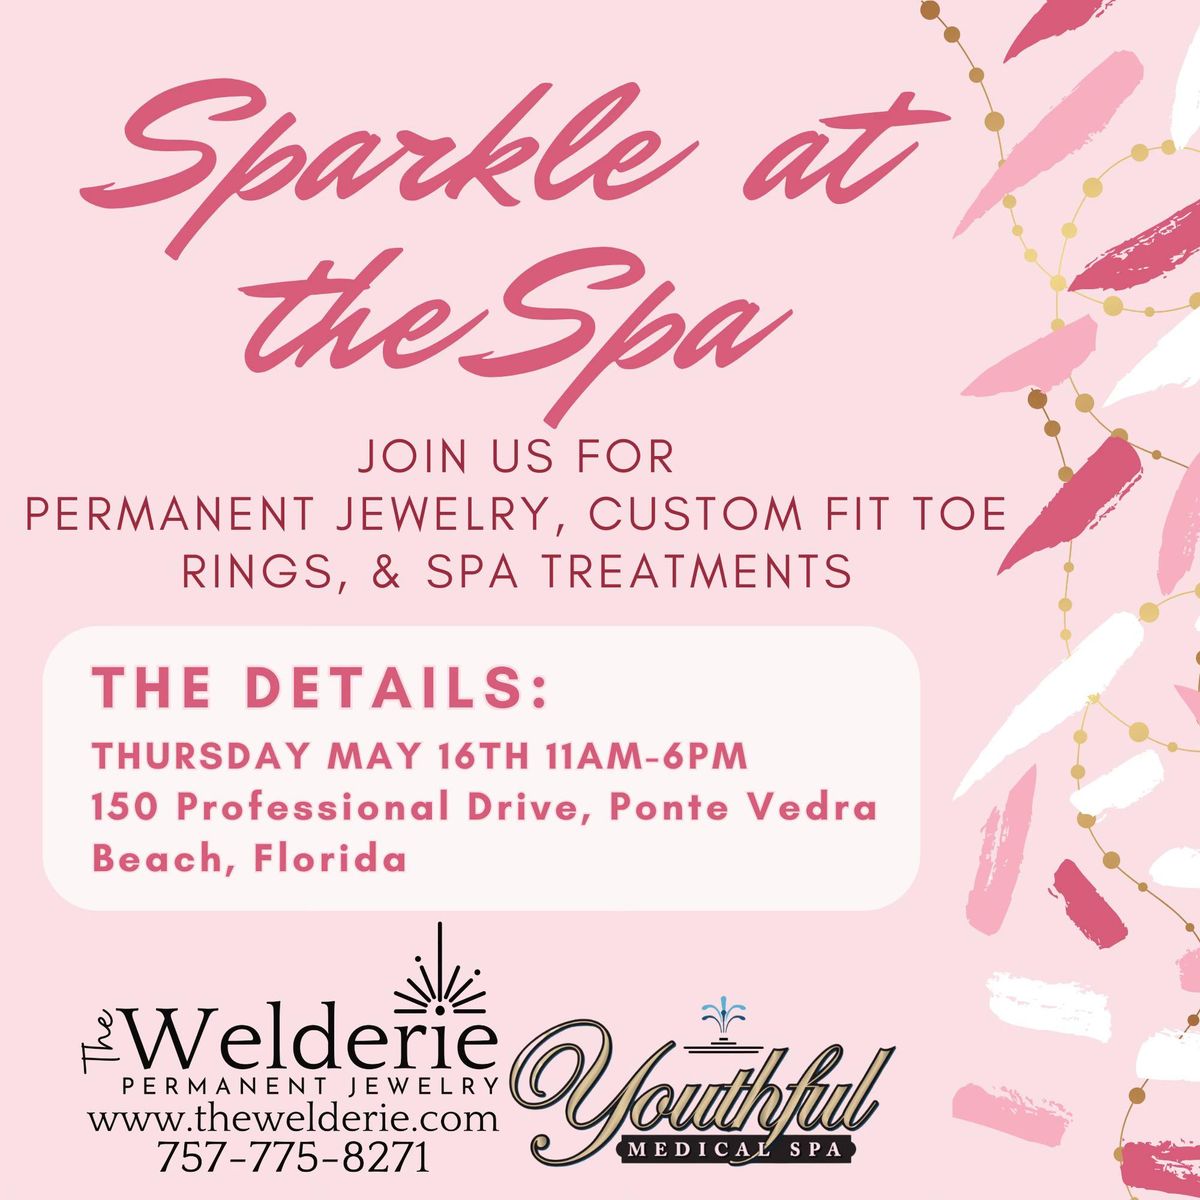 Sparkle at the Spa